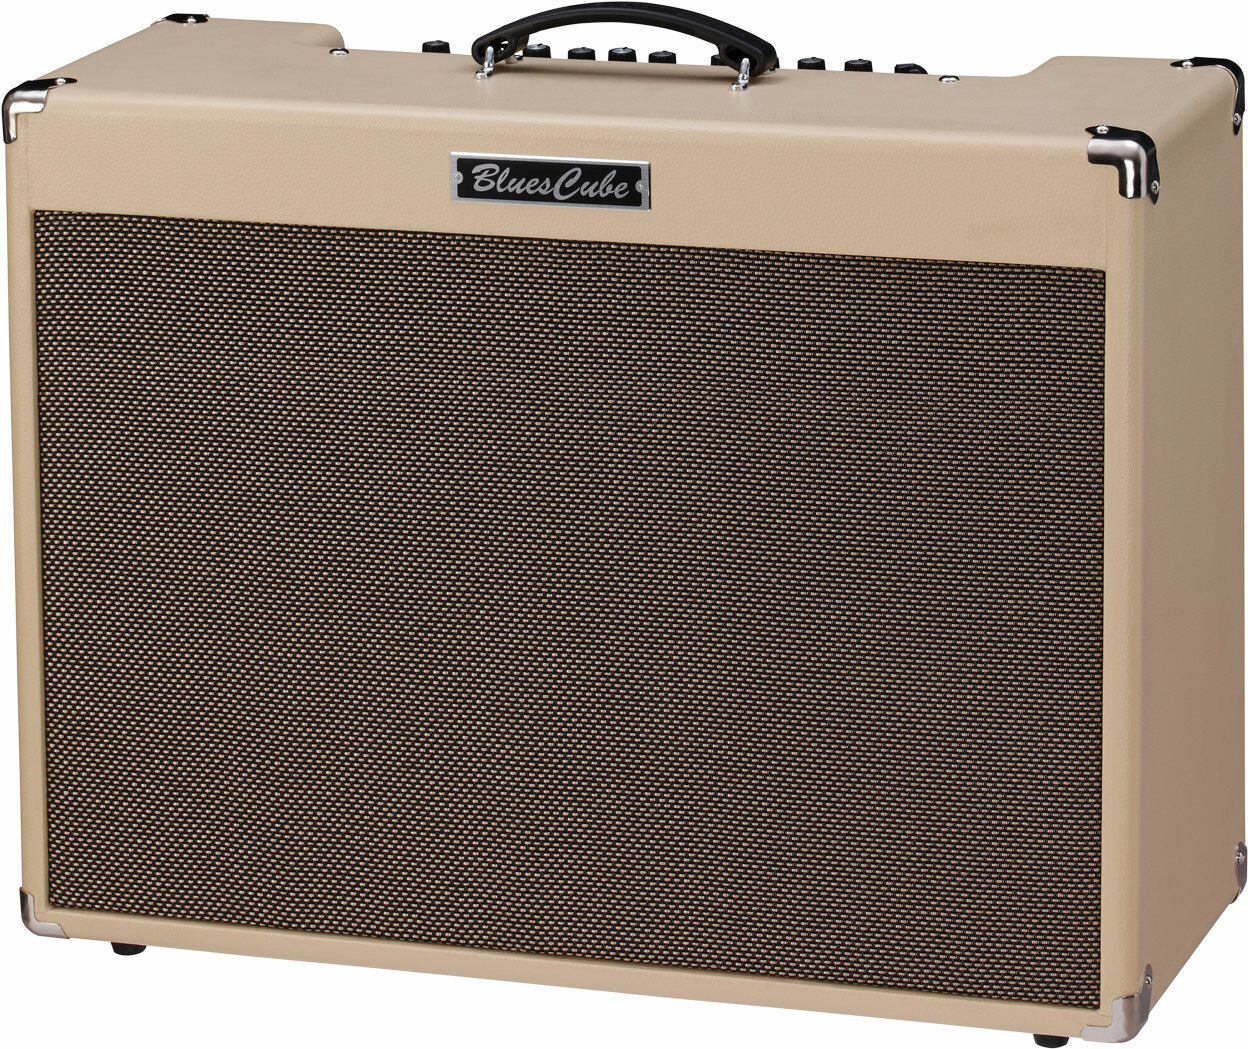 Roland Blues Cube Artist 85w 2x12 Blonde - Electric guitar combo amp - Main picture